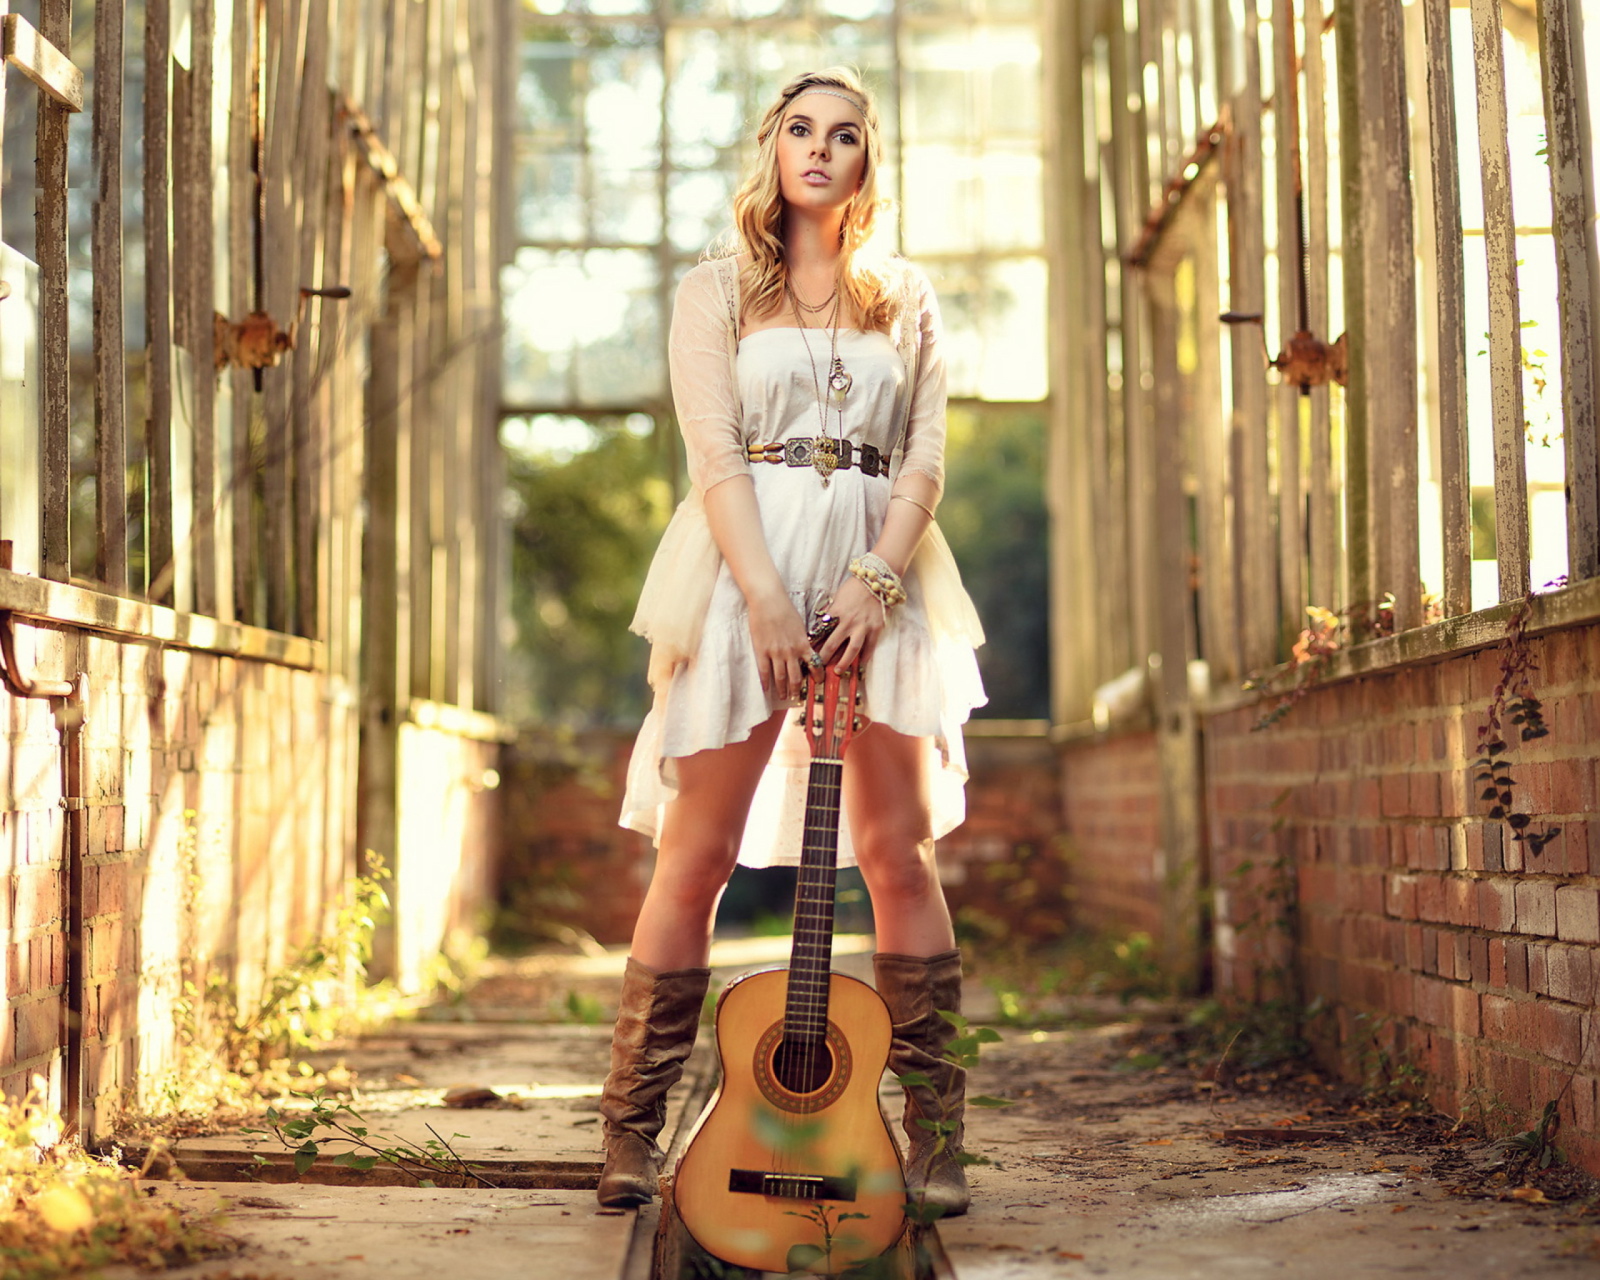 Girl With Guitar Chic Country Style wallpaper 1600x1280